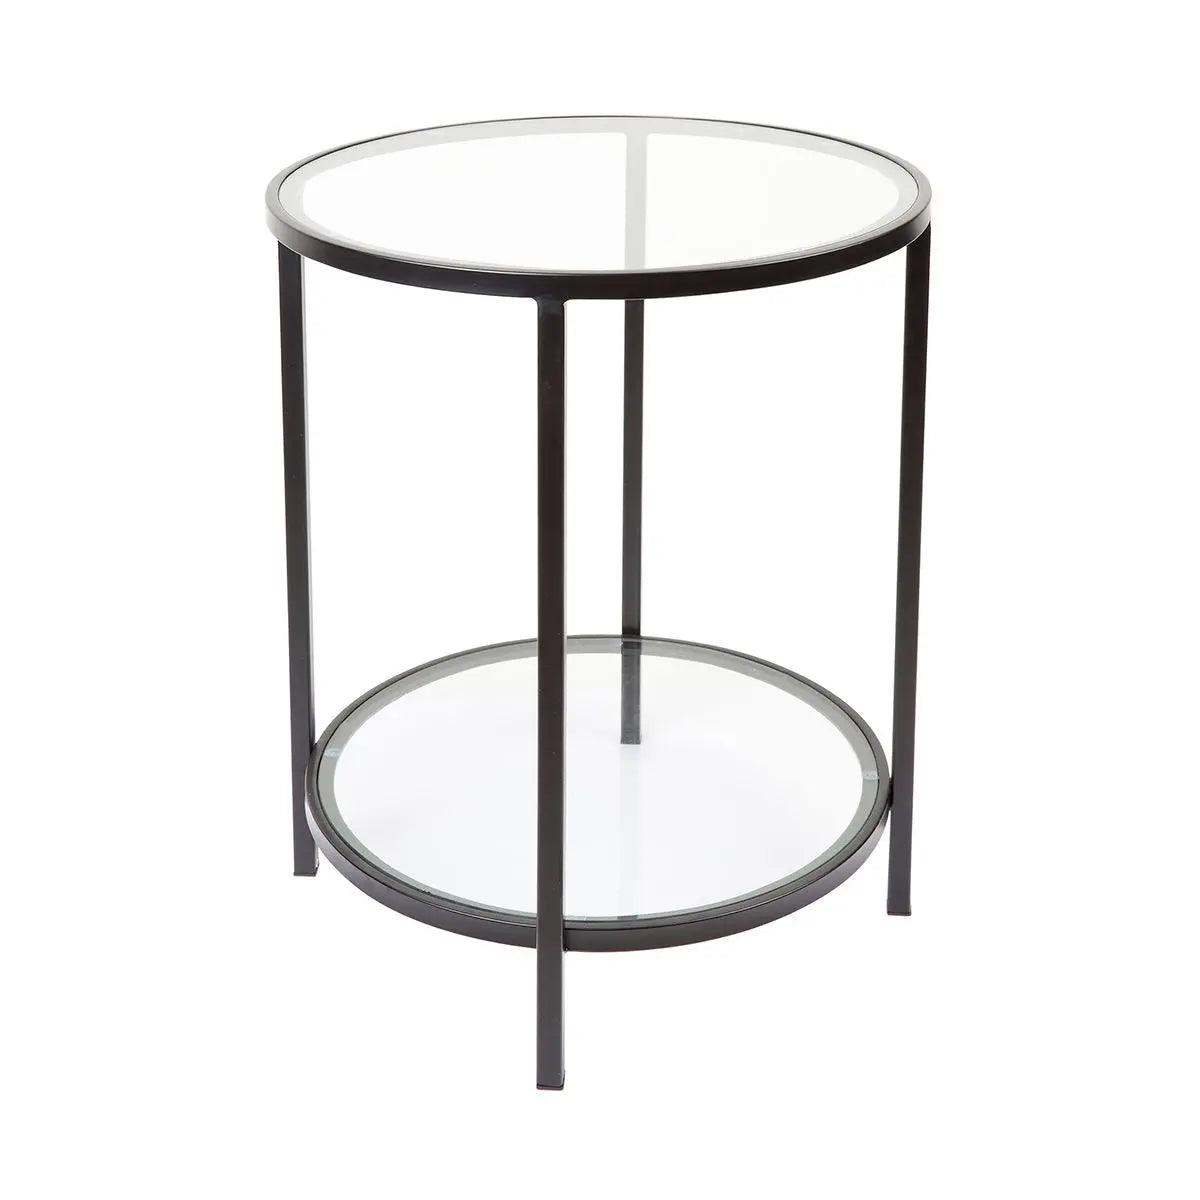 Cafe Lighting & Living Cocktail Glass Round Side Table - Black - Side Table324139320294117460 2